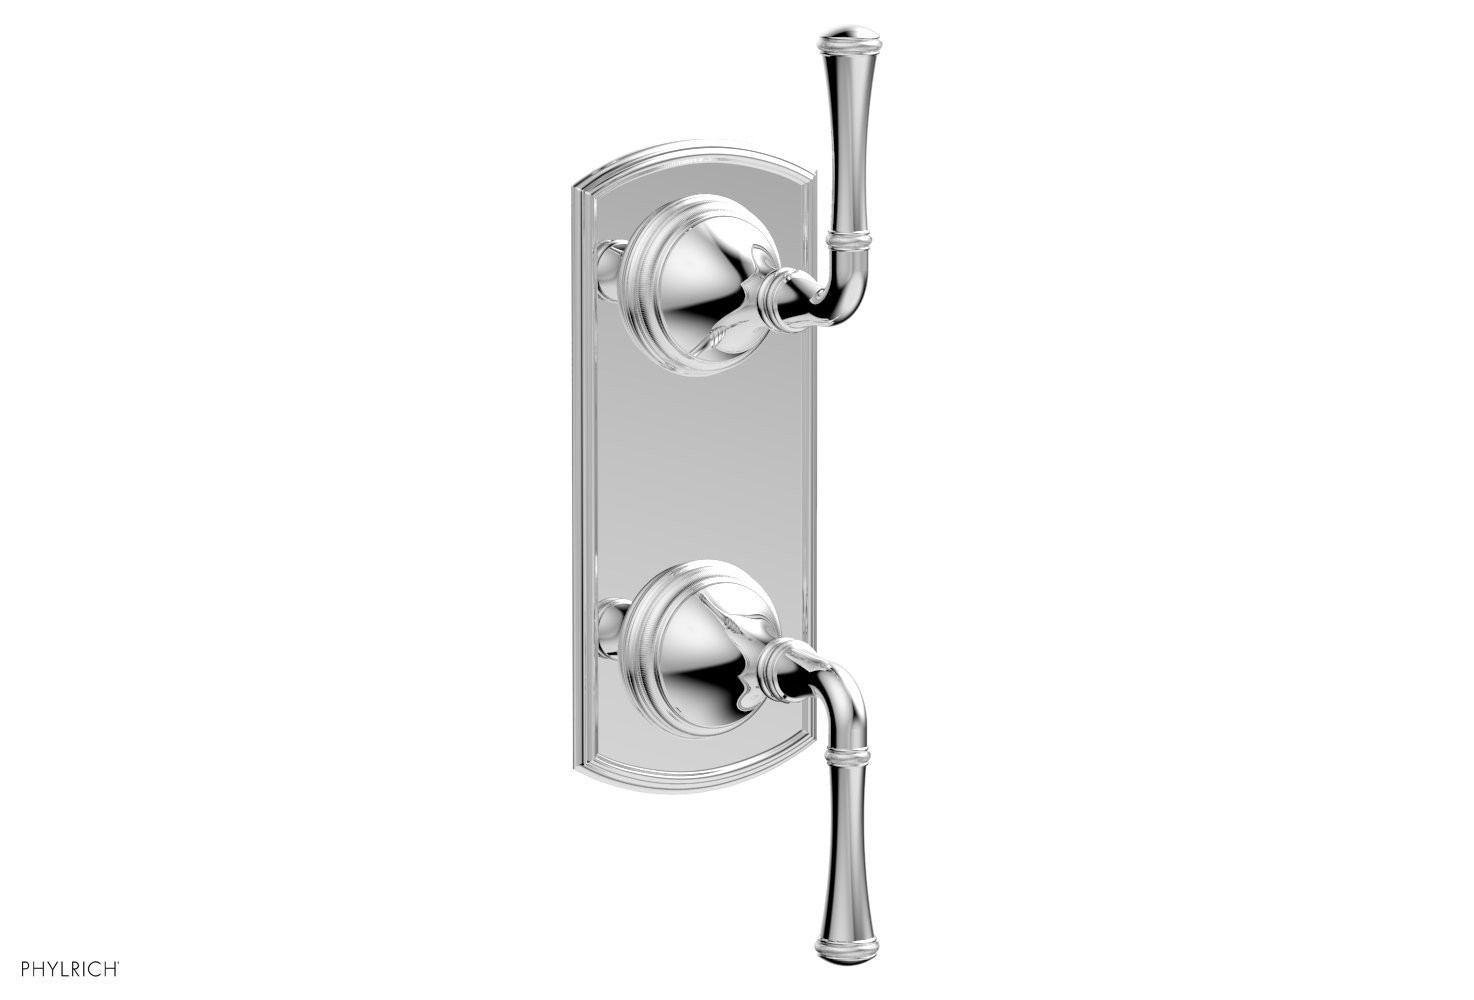 PHYLRICH 4-136 COINED WALL MOUNT TWO LEVER HANDLES MINI THERMOSTATIC VALVE WITH VOLUME CONTROL OR DIVERTER TRIM